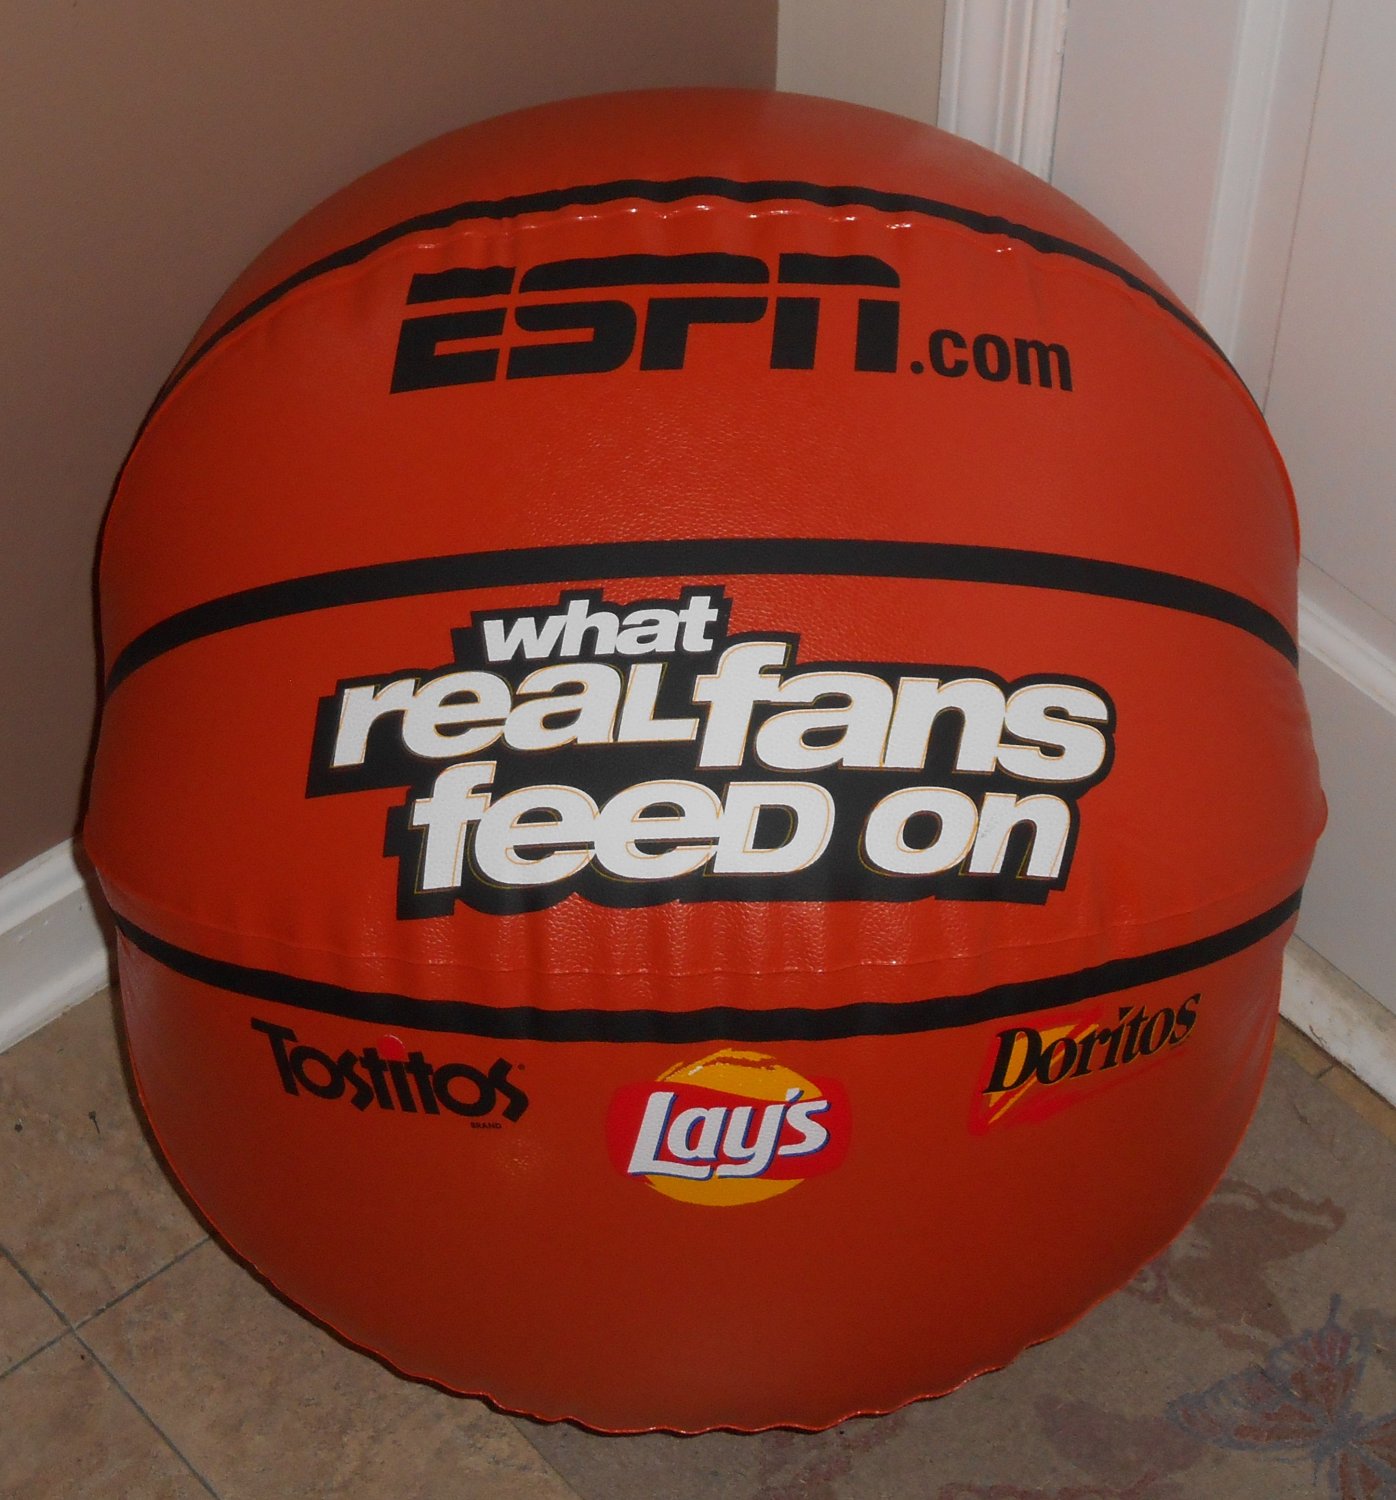 ESPN Frito Lay Inflatable 24 Inch Vinyl Basketball Tostitos Lay's Doritos What Real Fans Feed On